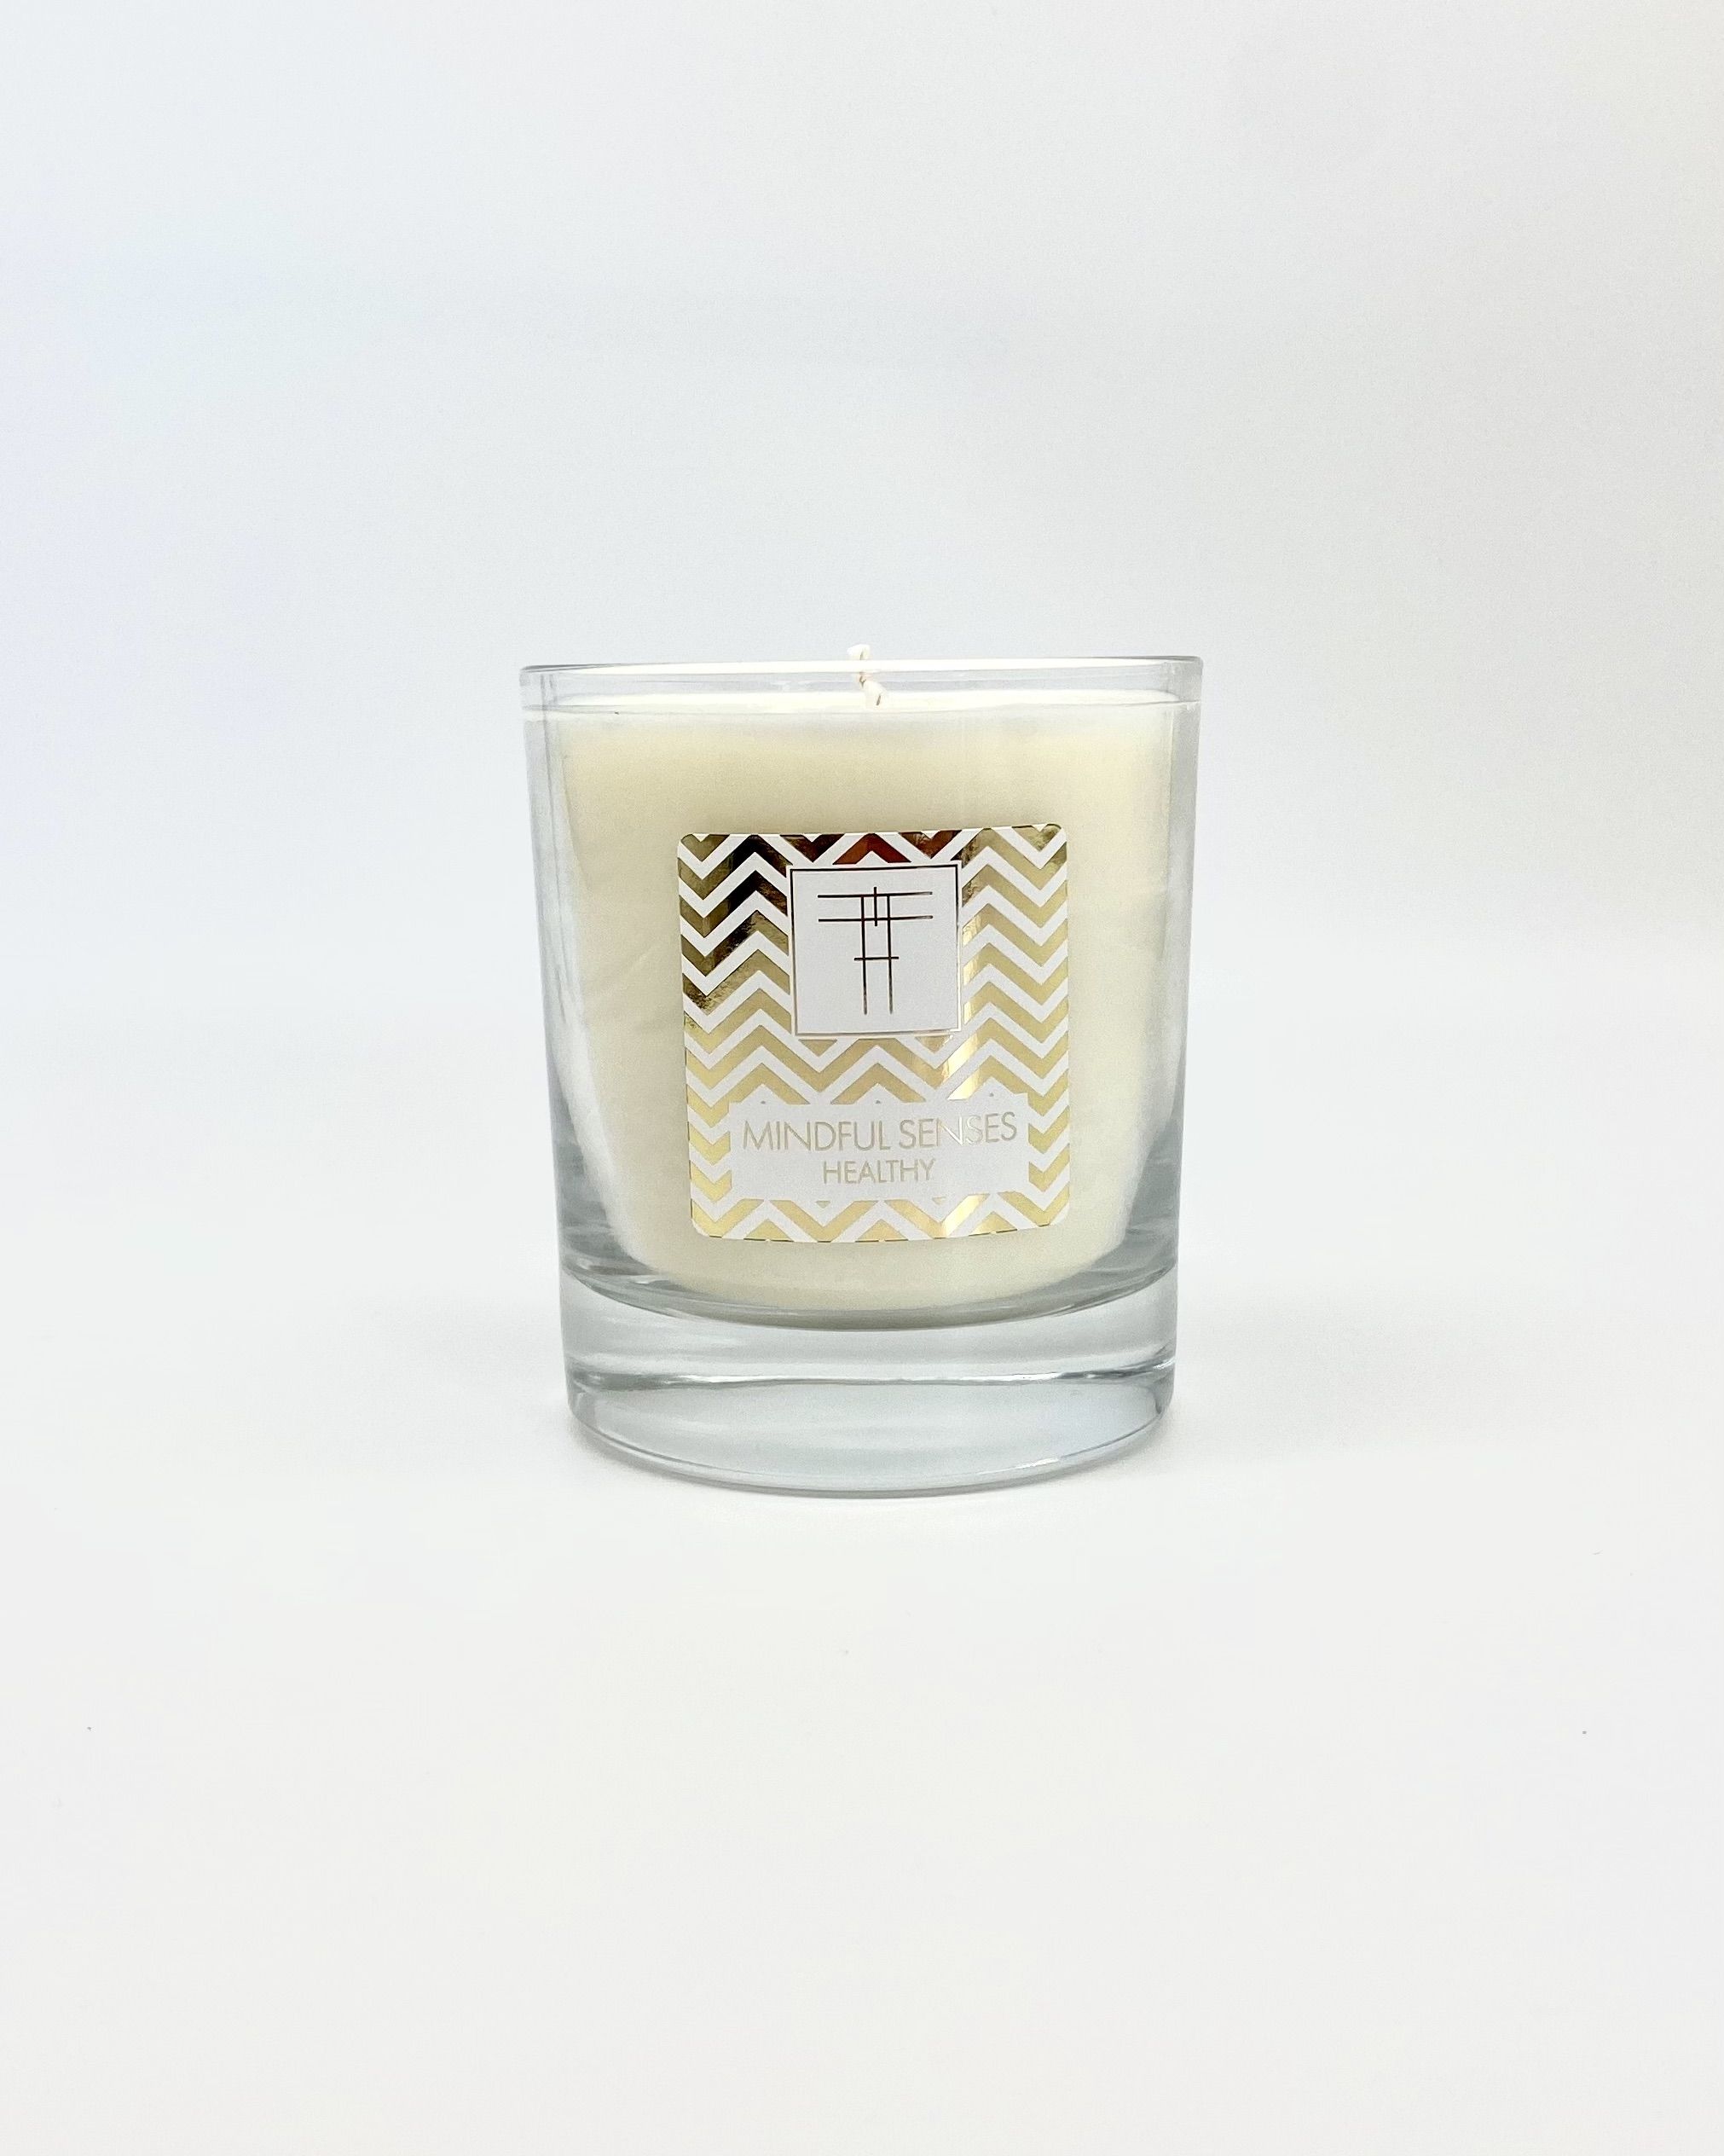 Created to create a calm and restorative enviroment, Mindful Senses Candles are emotive triggers of colour, scent and mood. Invigorate a sluggish pshcye and languishing spirit. Lifes demands and trials require an energtic boost. Precious clary sage, citrus and green herbs promote confident, sincere action and renew the soul.

Size 300cl 45+ Hour burn time.